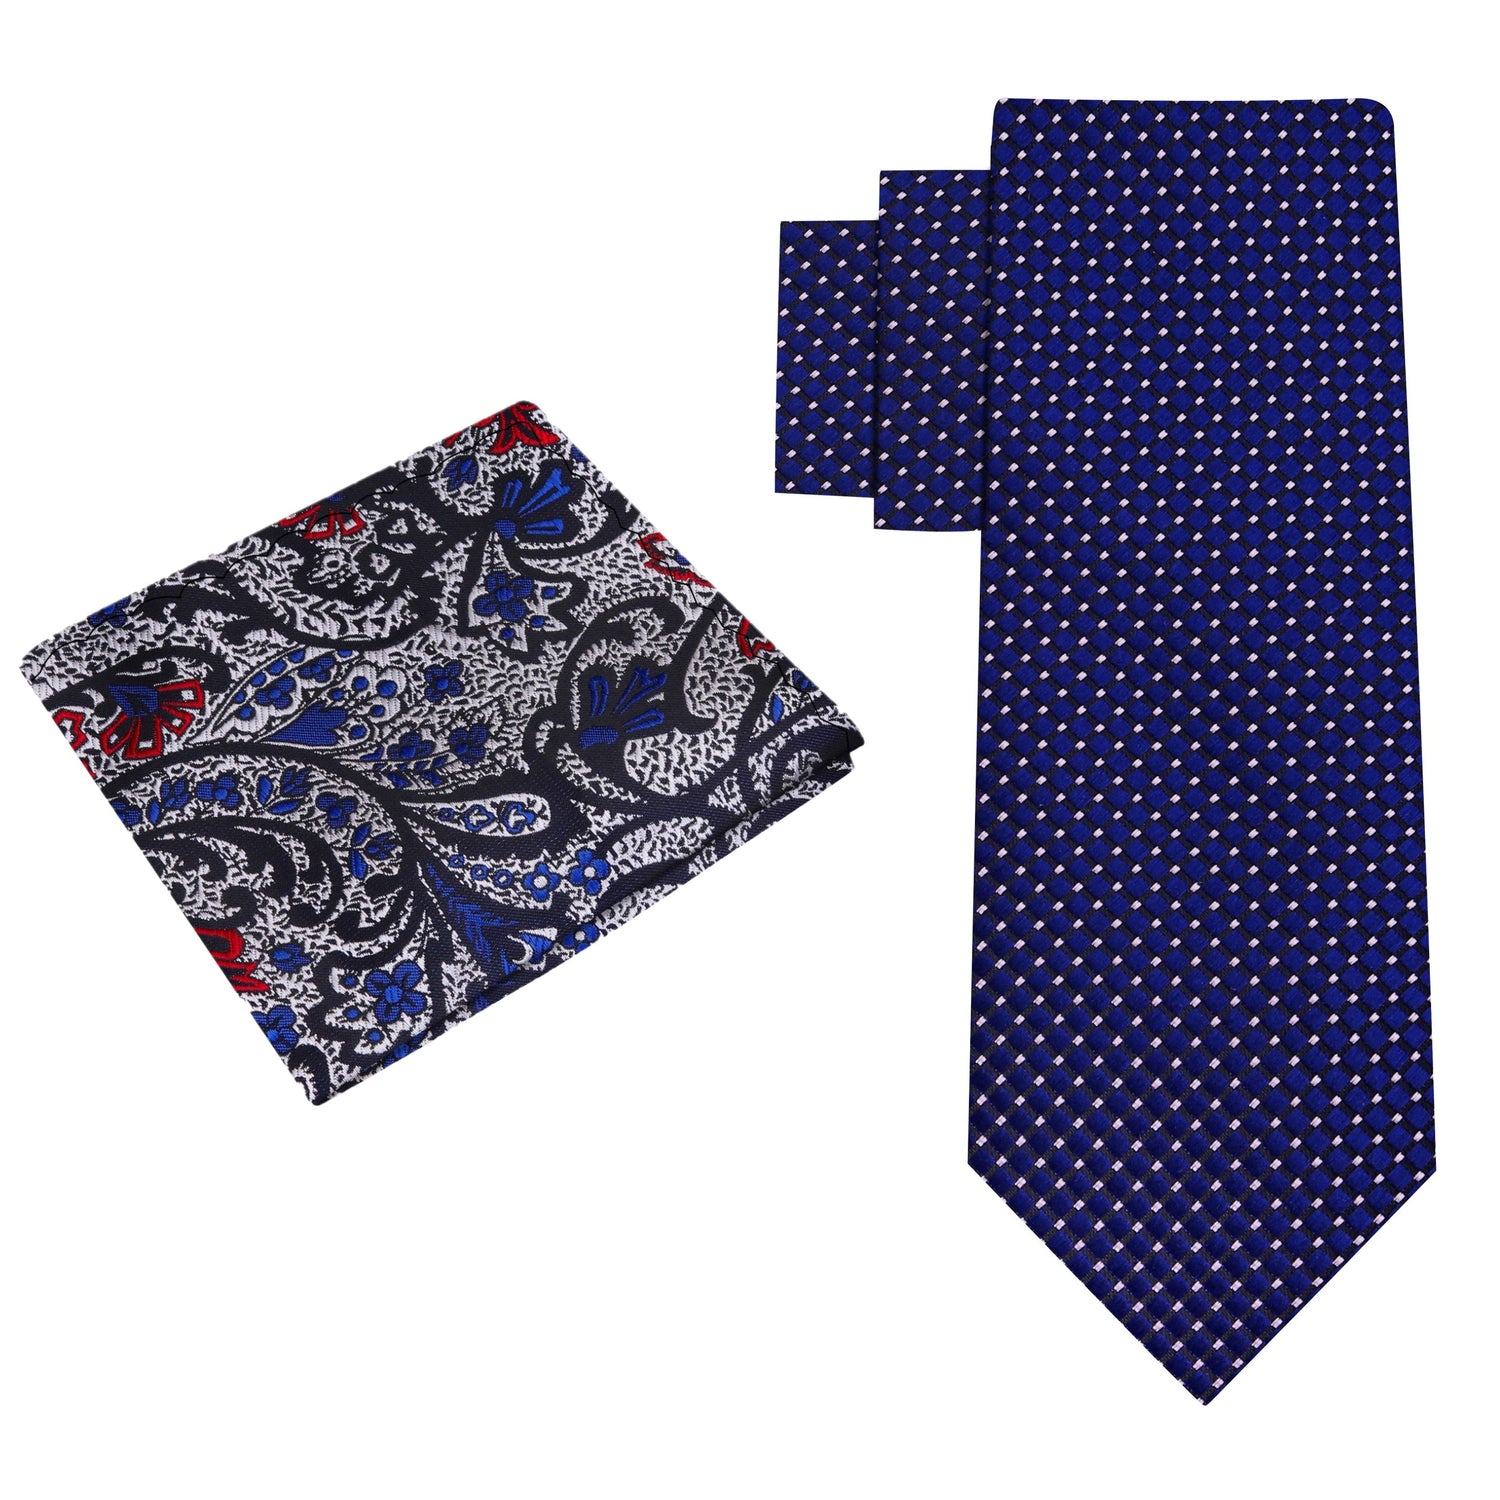 Alt View: A Dark Blue Small Geometric Diamond With Small Dots Pattern Silk Necktie With Silver, Blue, Red Pocket Square